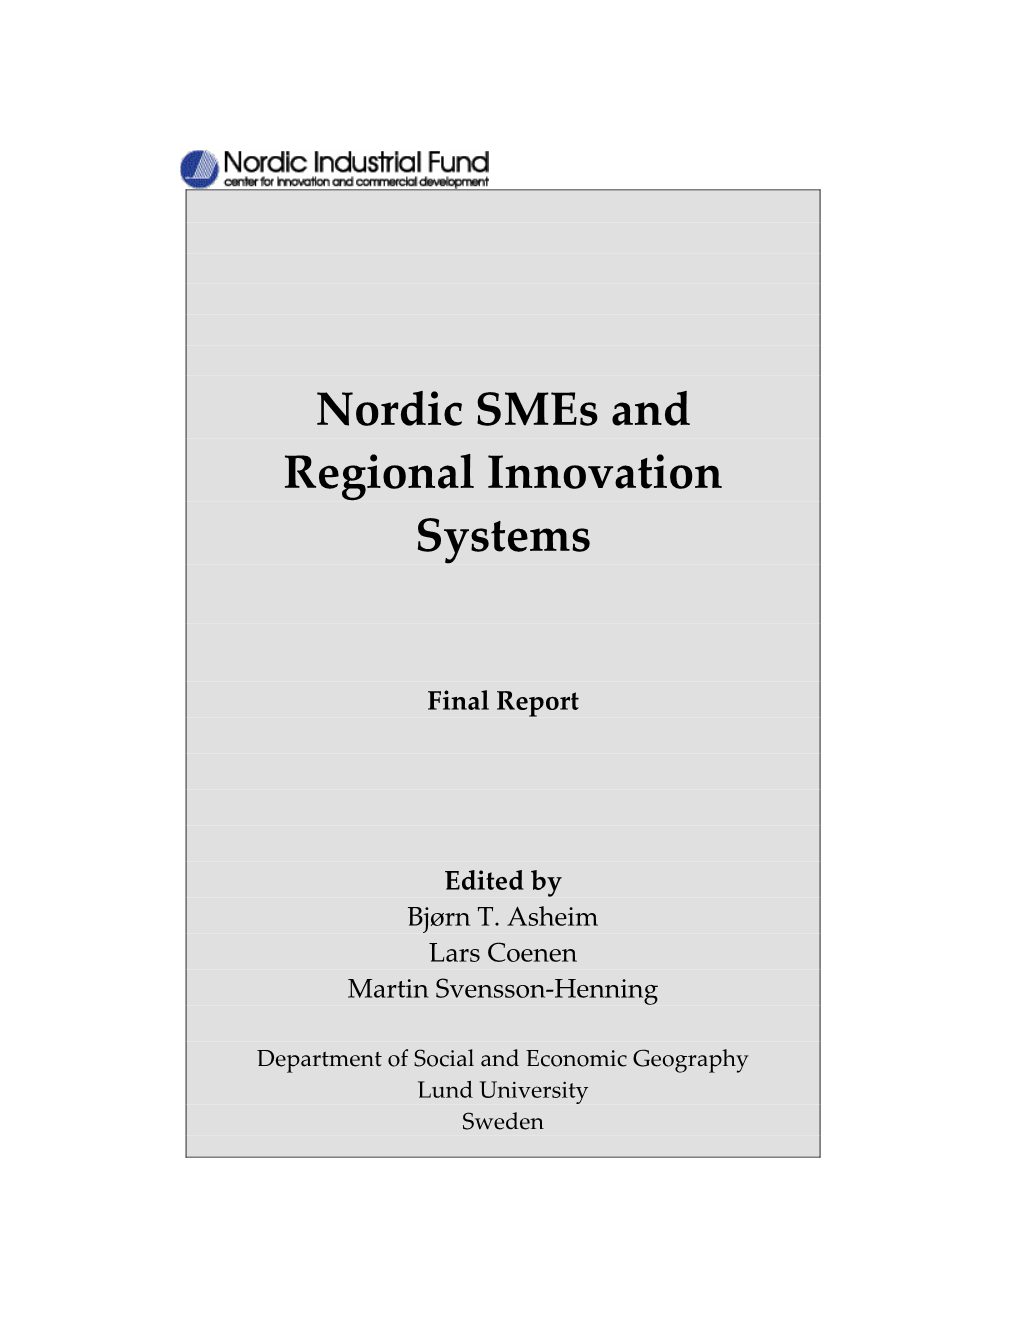 Nordic Smes and Regional Innovation Systems